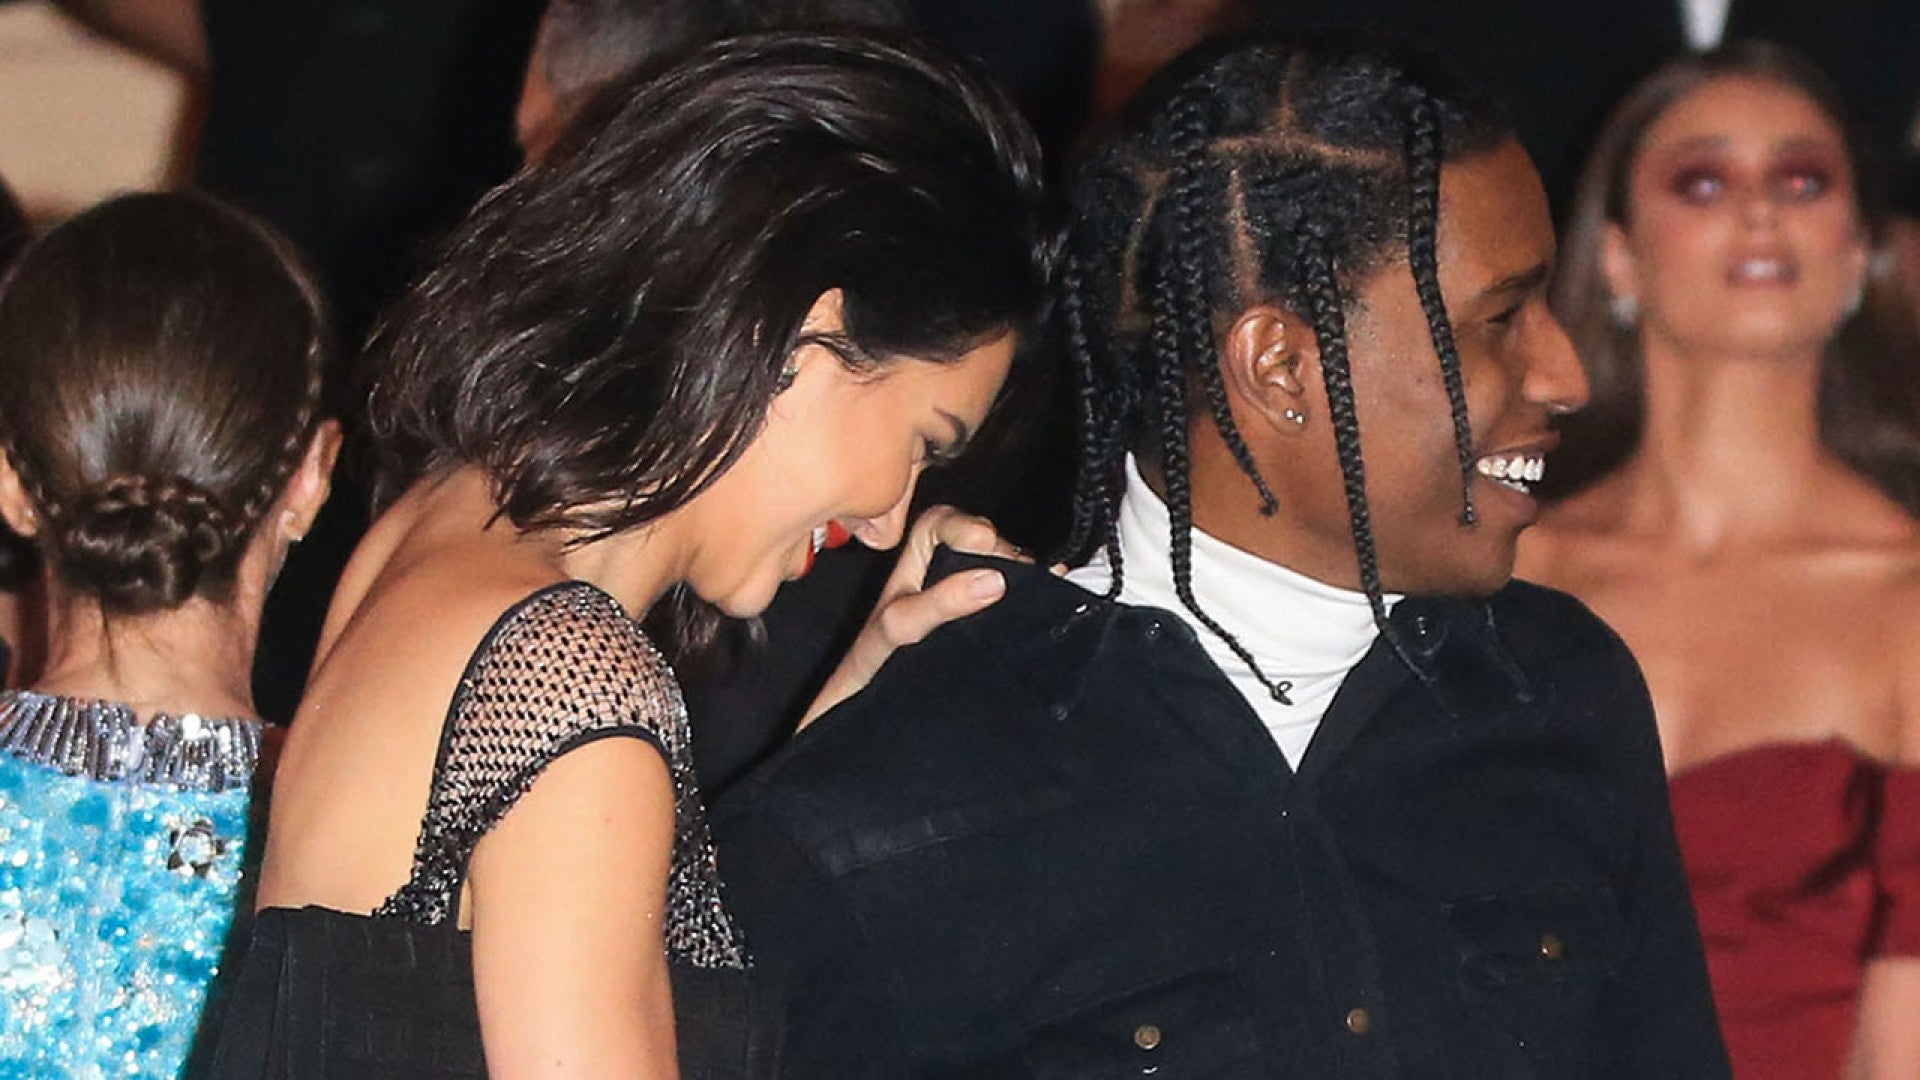 Kendall Jenner and A$AP Rocky Twinning Fanny Pack Style